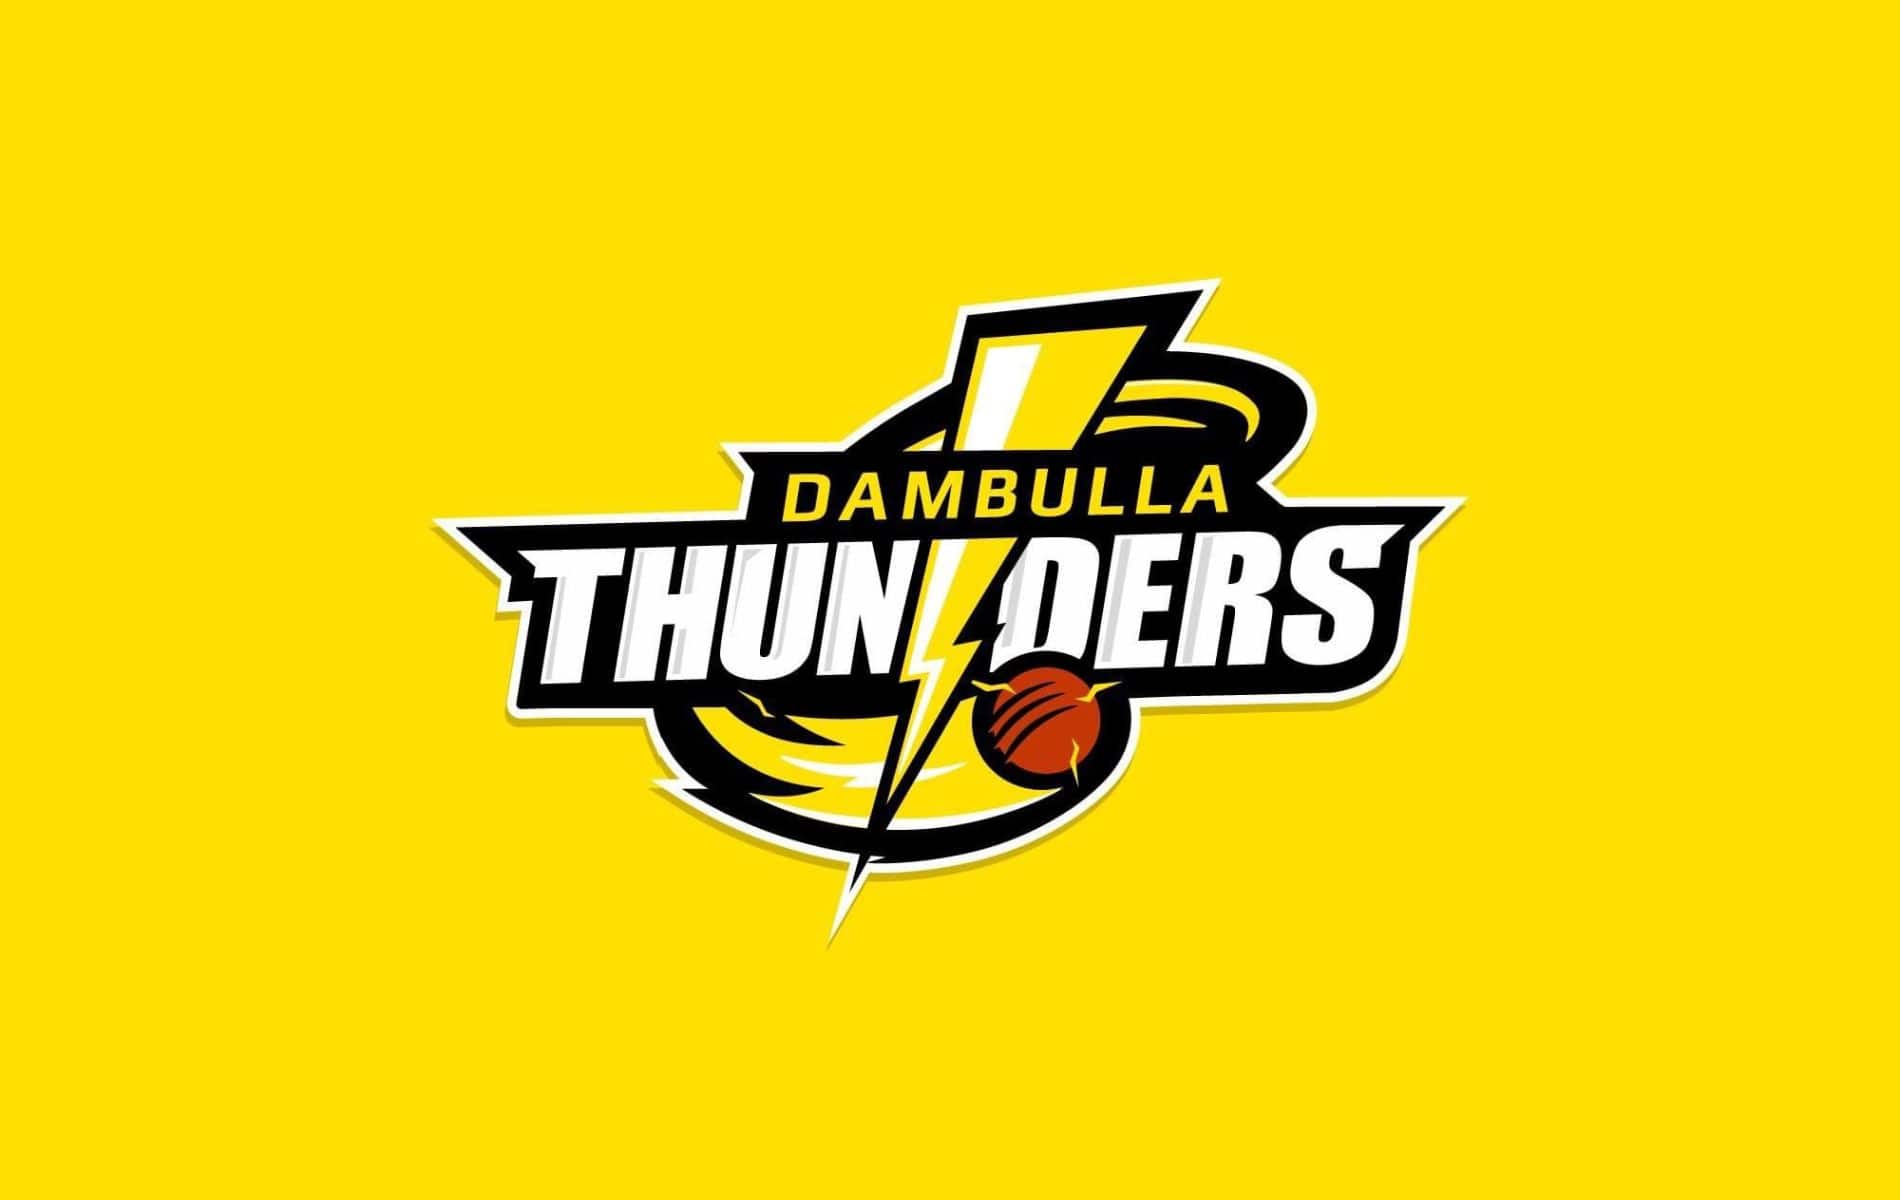 LPL Announces 'Immediate Termination' Of Dambulla Thunders After Owner Got Arrested